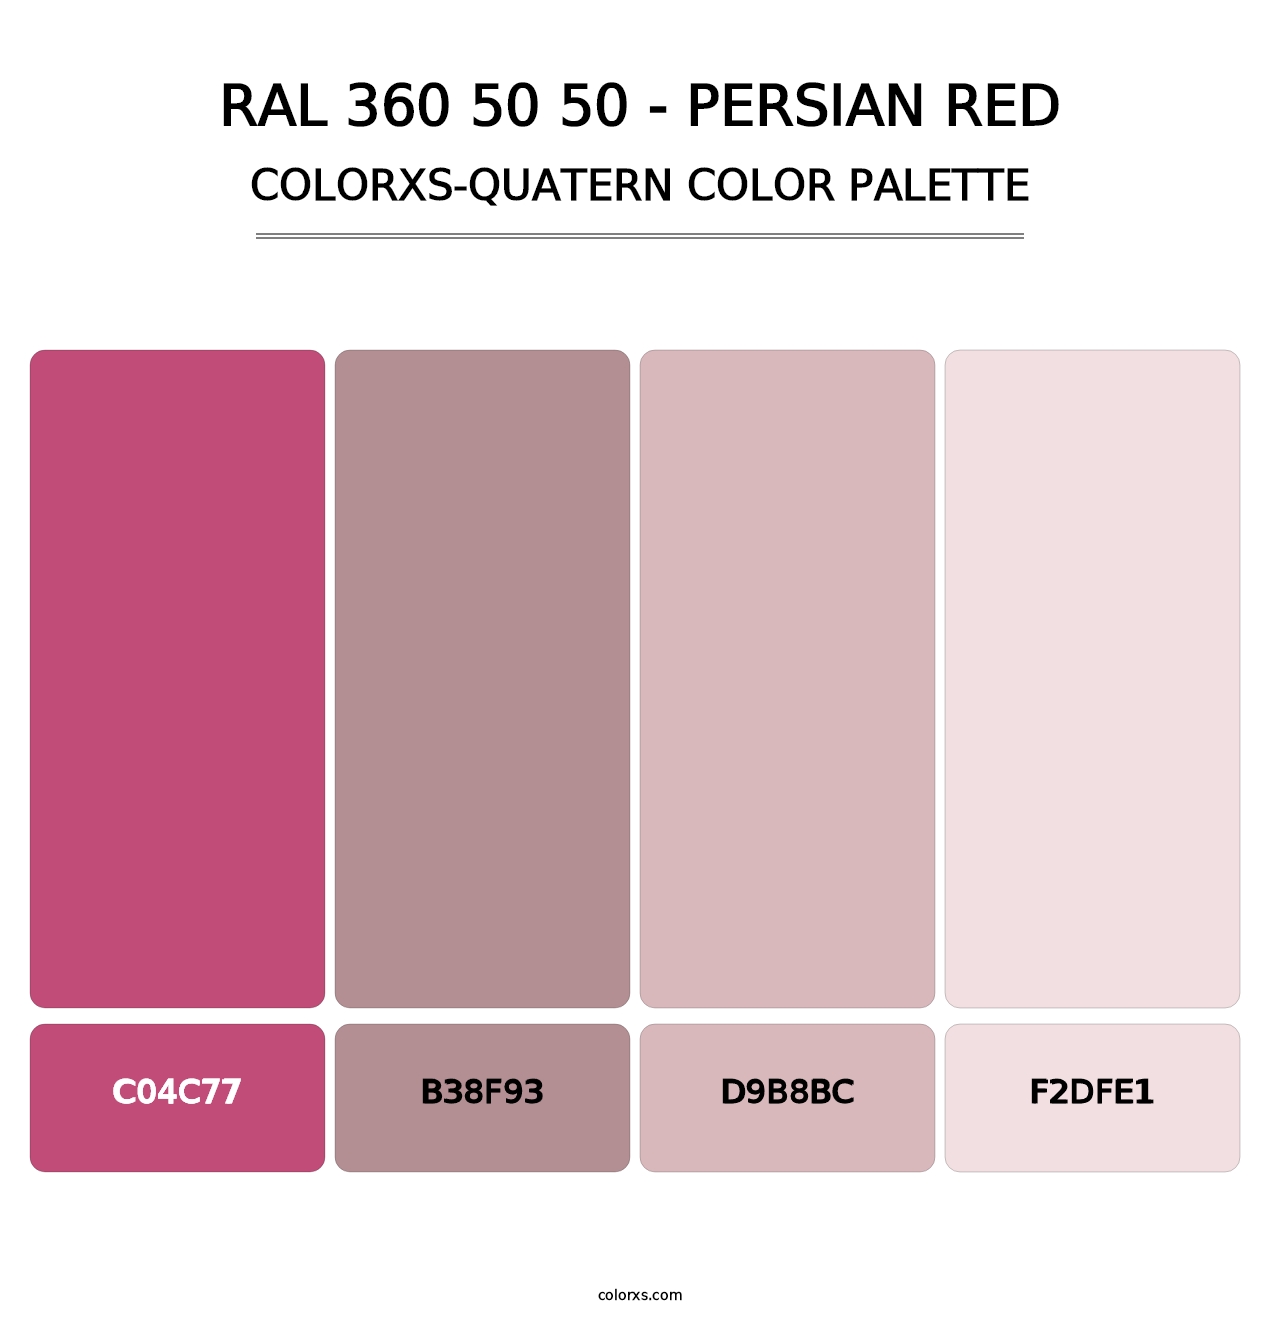 RAL 360 50 50 - Persian Red - Colorxs Quatern Palette